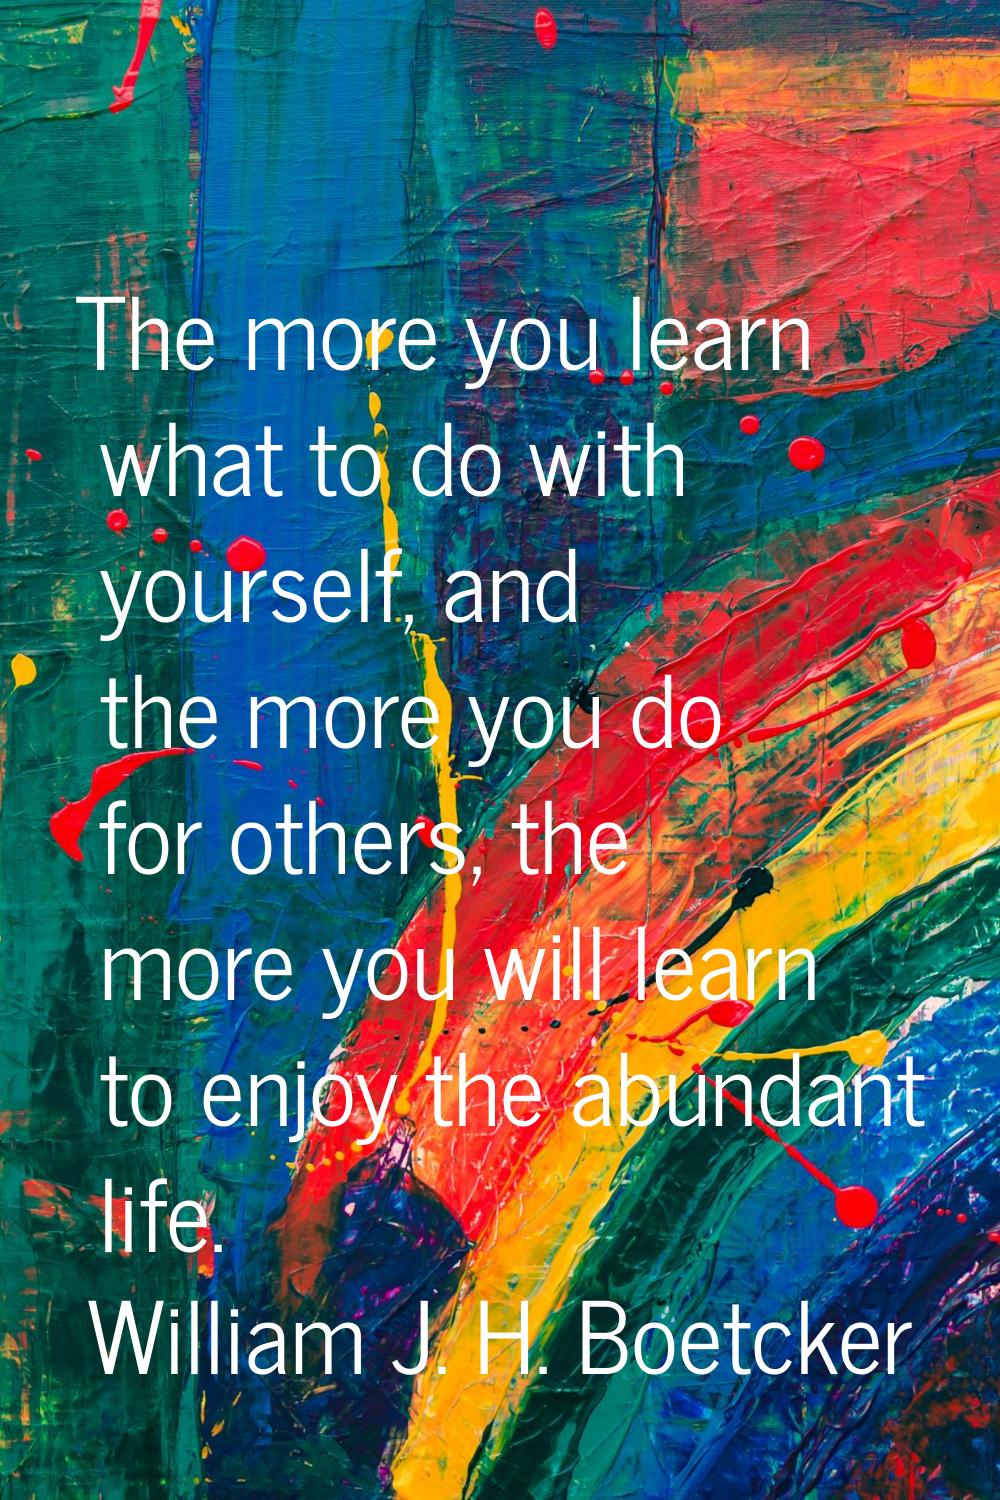 The more you learn what to do with yourself, and the more you do for others, the more you will lear